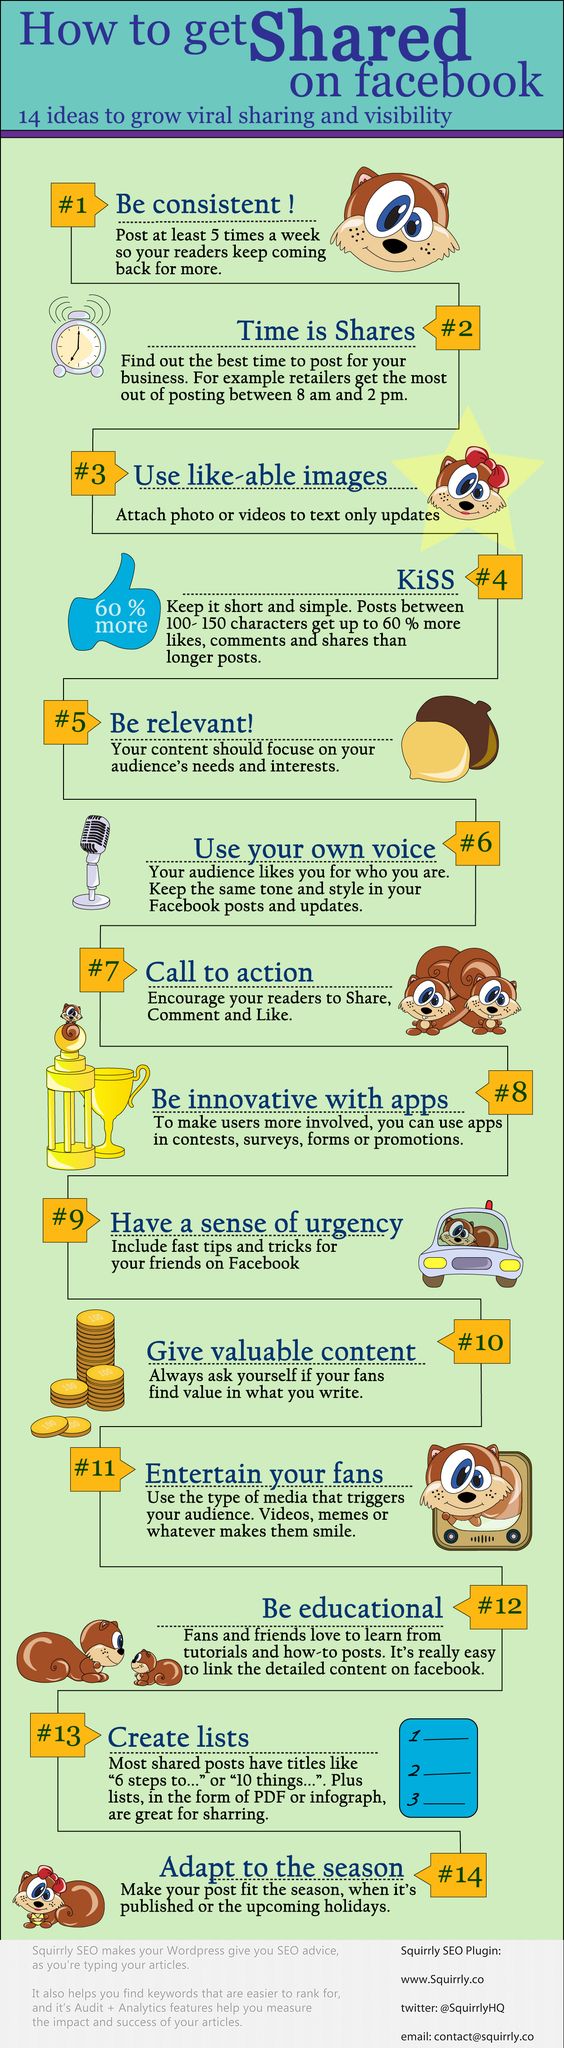 How To Get Shared On Facebook - 16 Ideas To Grow Viral Sharing And Visibility #infographic